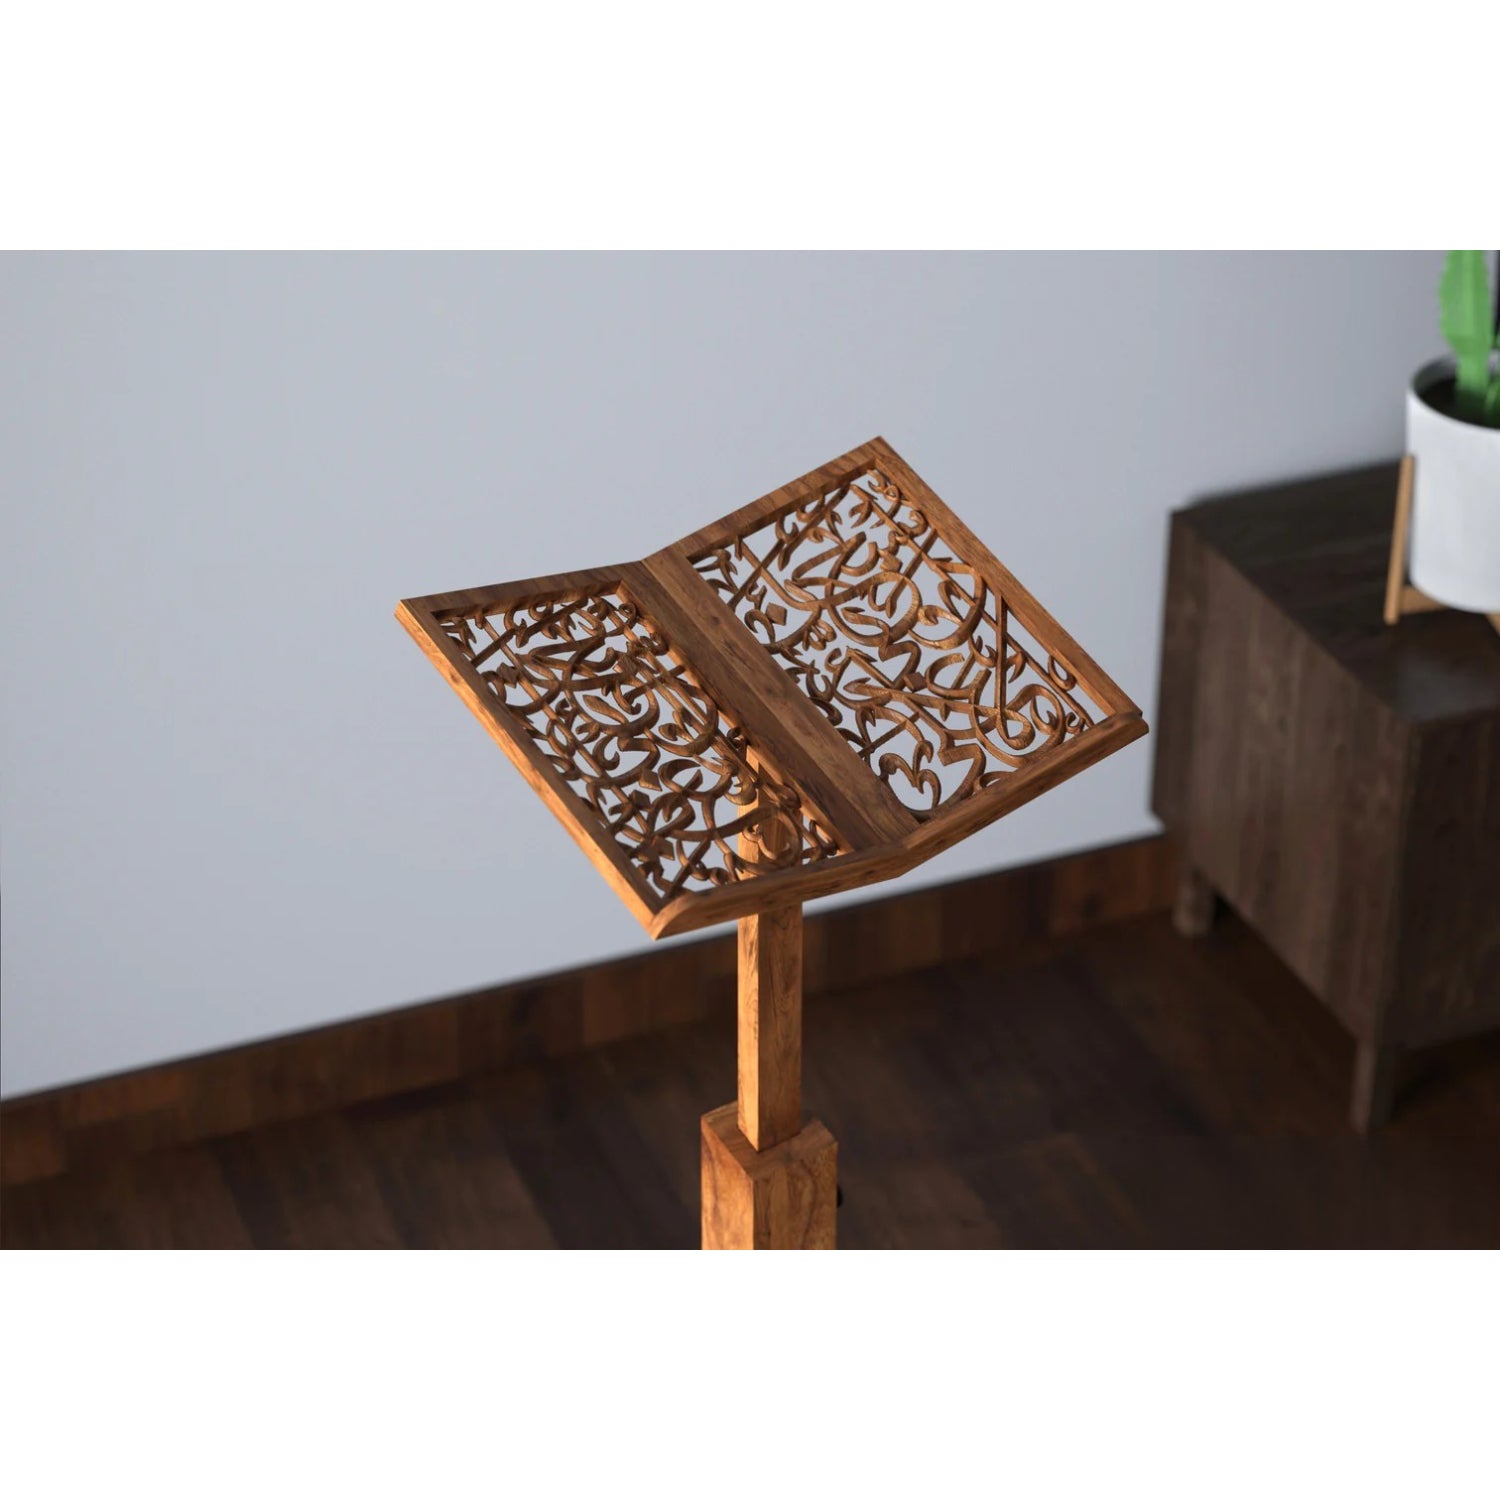 Adjustable Wooden Arabic Caligraphy Quran Stand - Hilalful